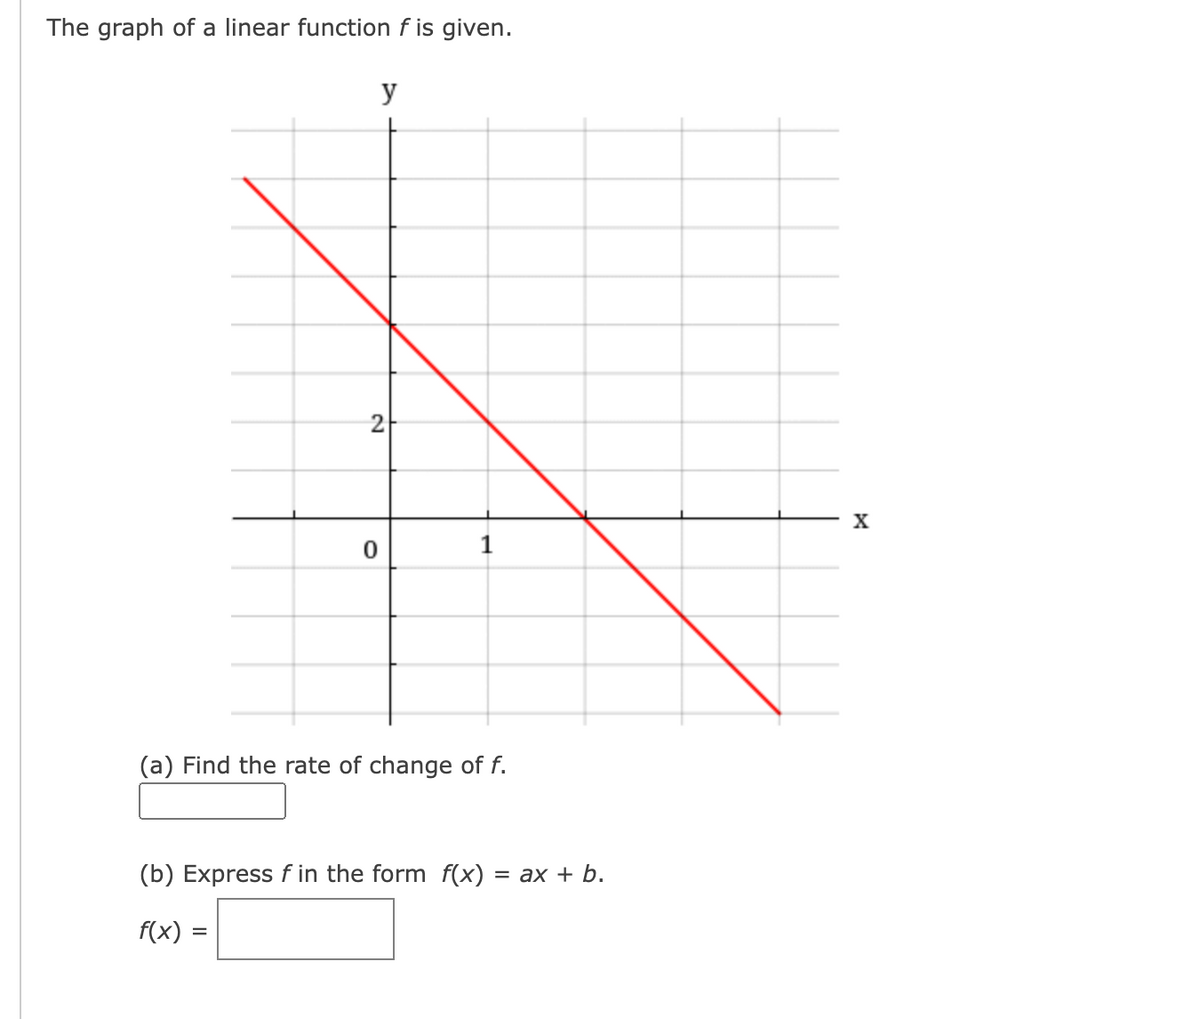 The graph of a linear function f is given.
y
X
(a) Find the rate of change of f.
(b) Express f in the form f(x)
= ax + b.
f(x)
2)
